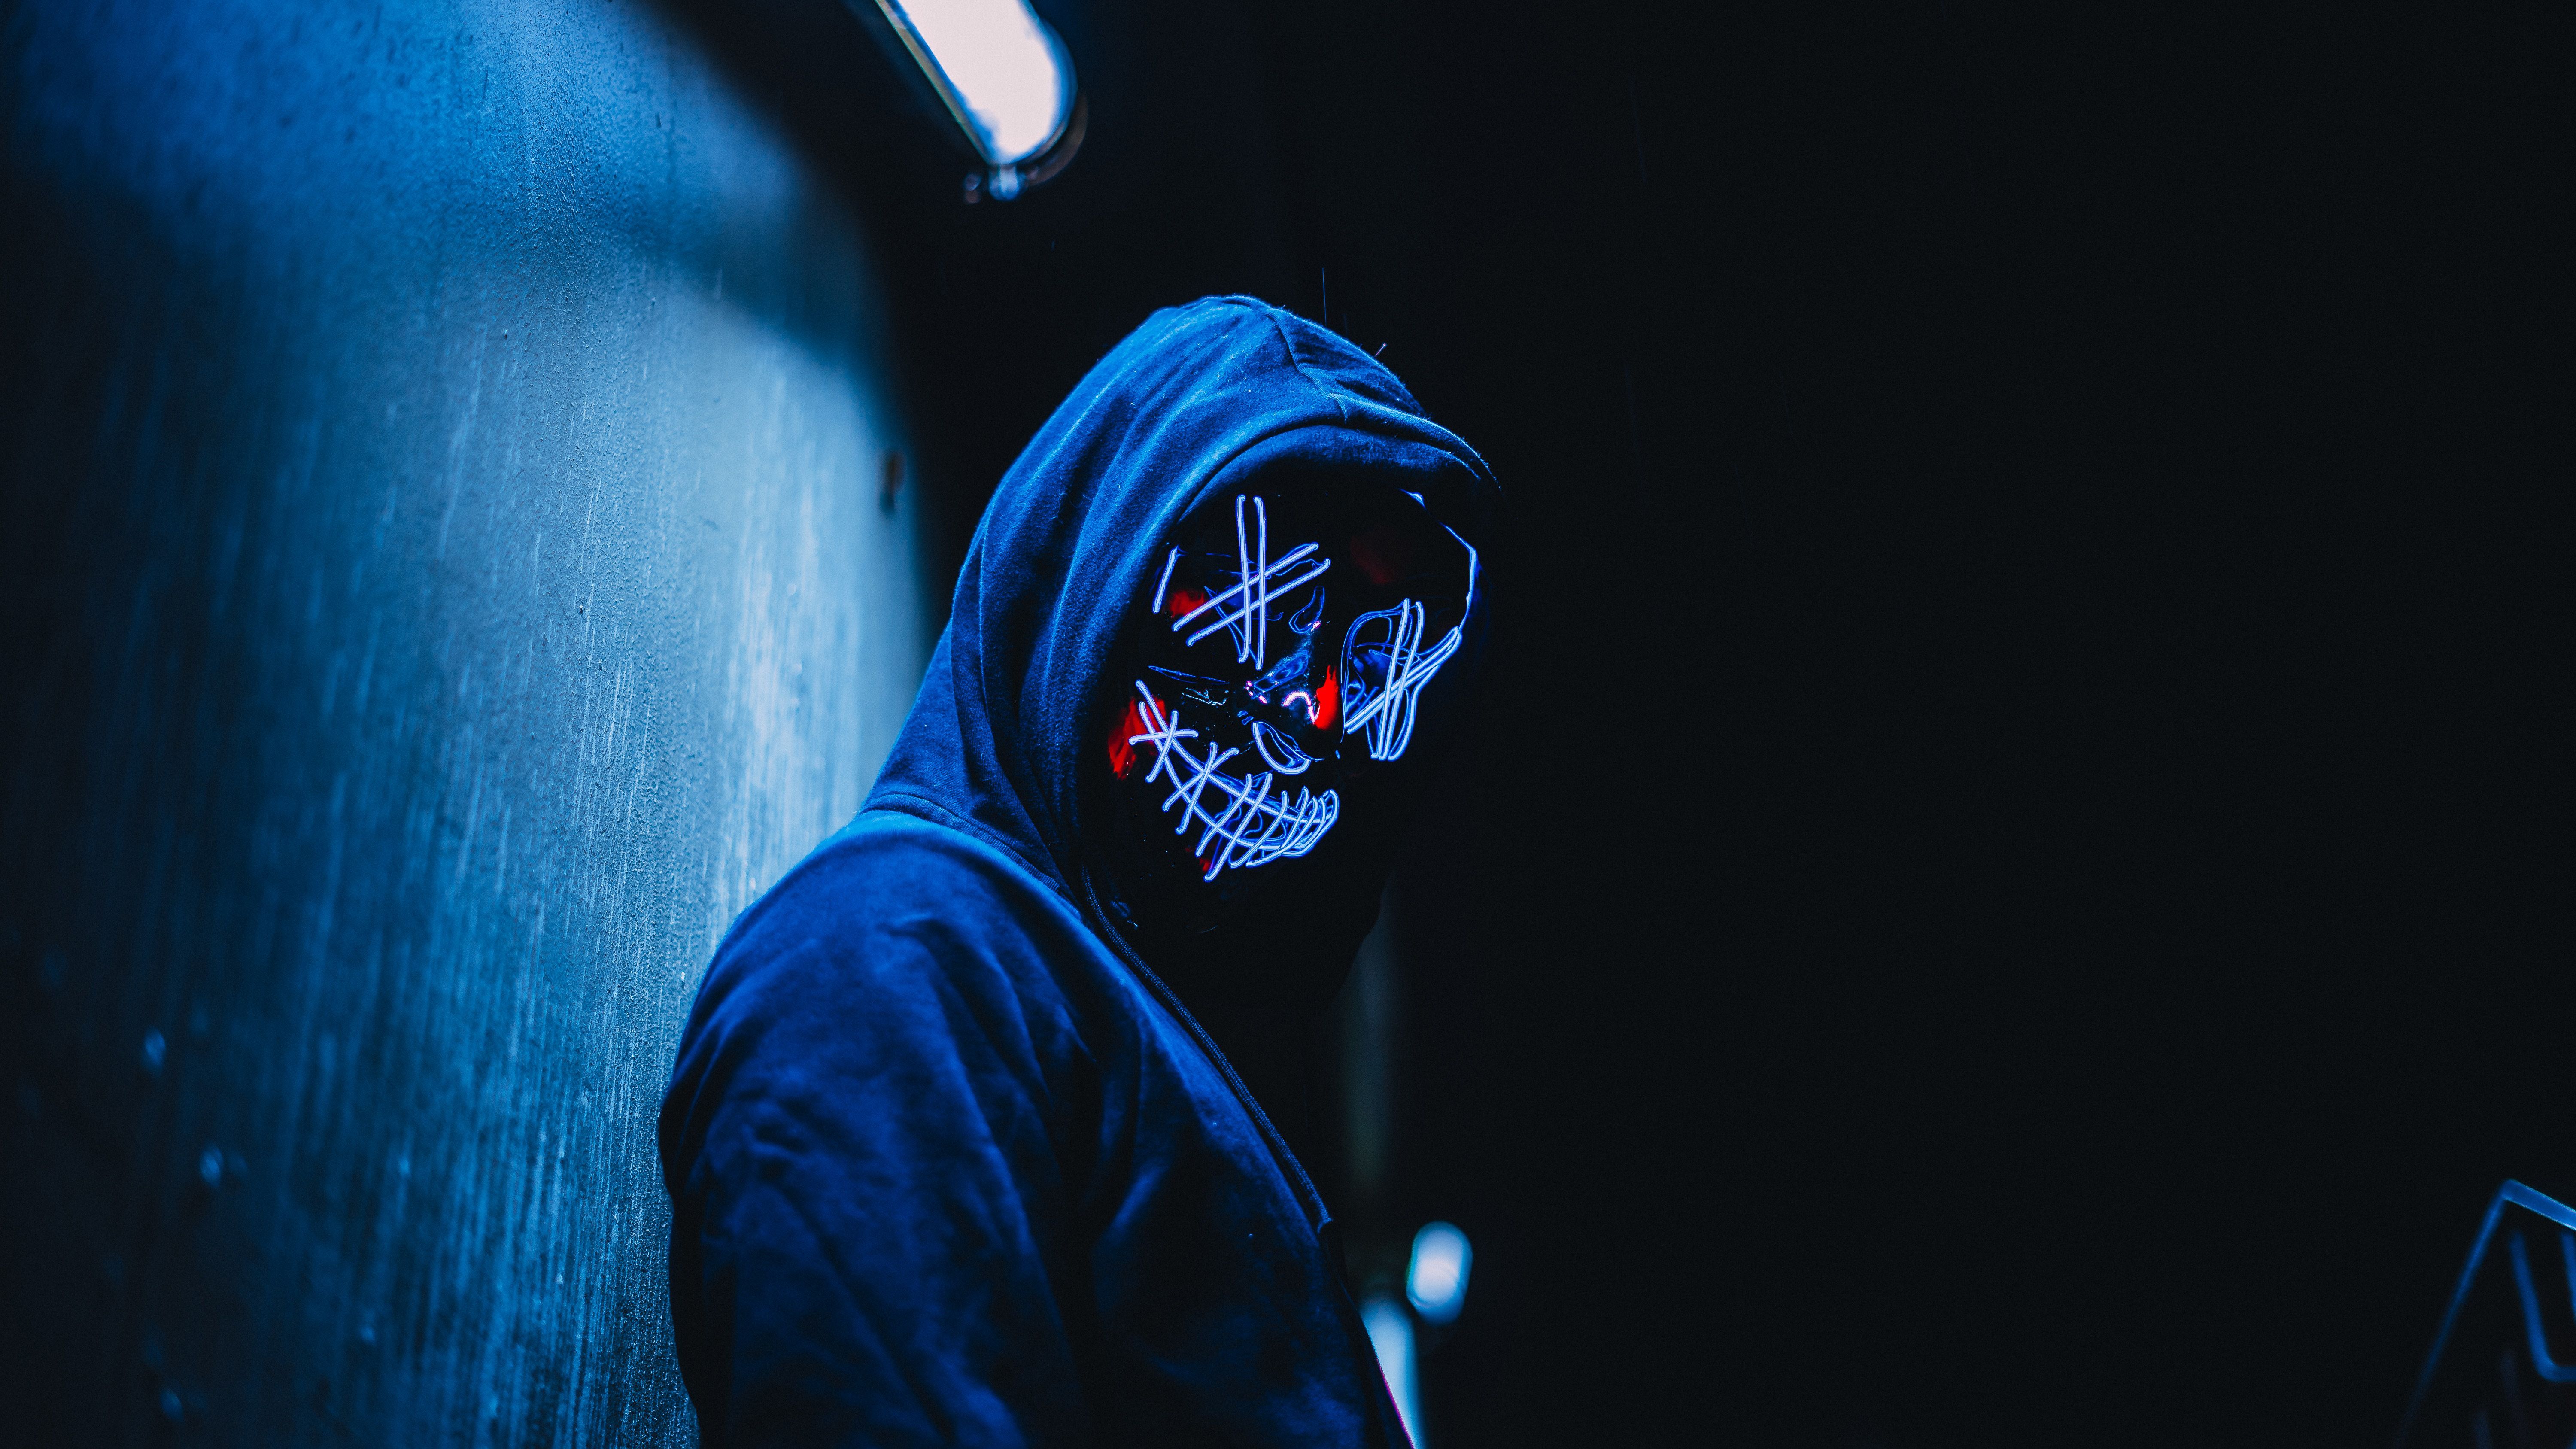 Purge mask wallpapers